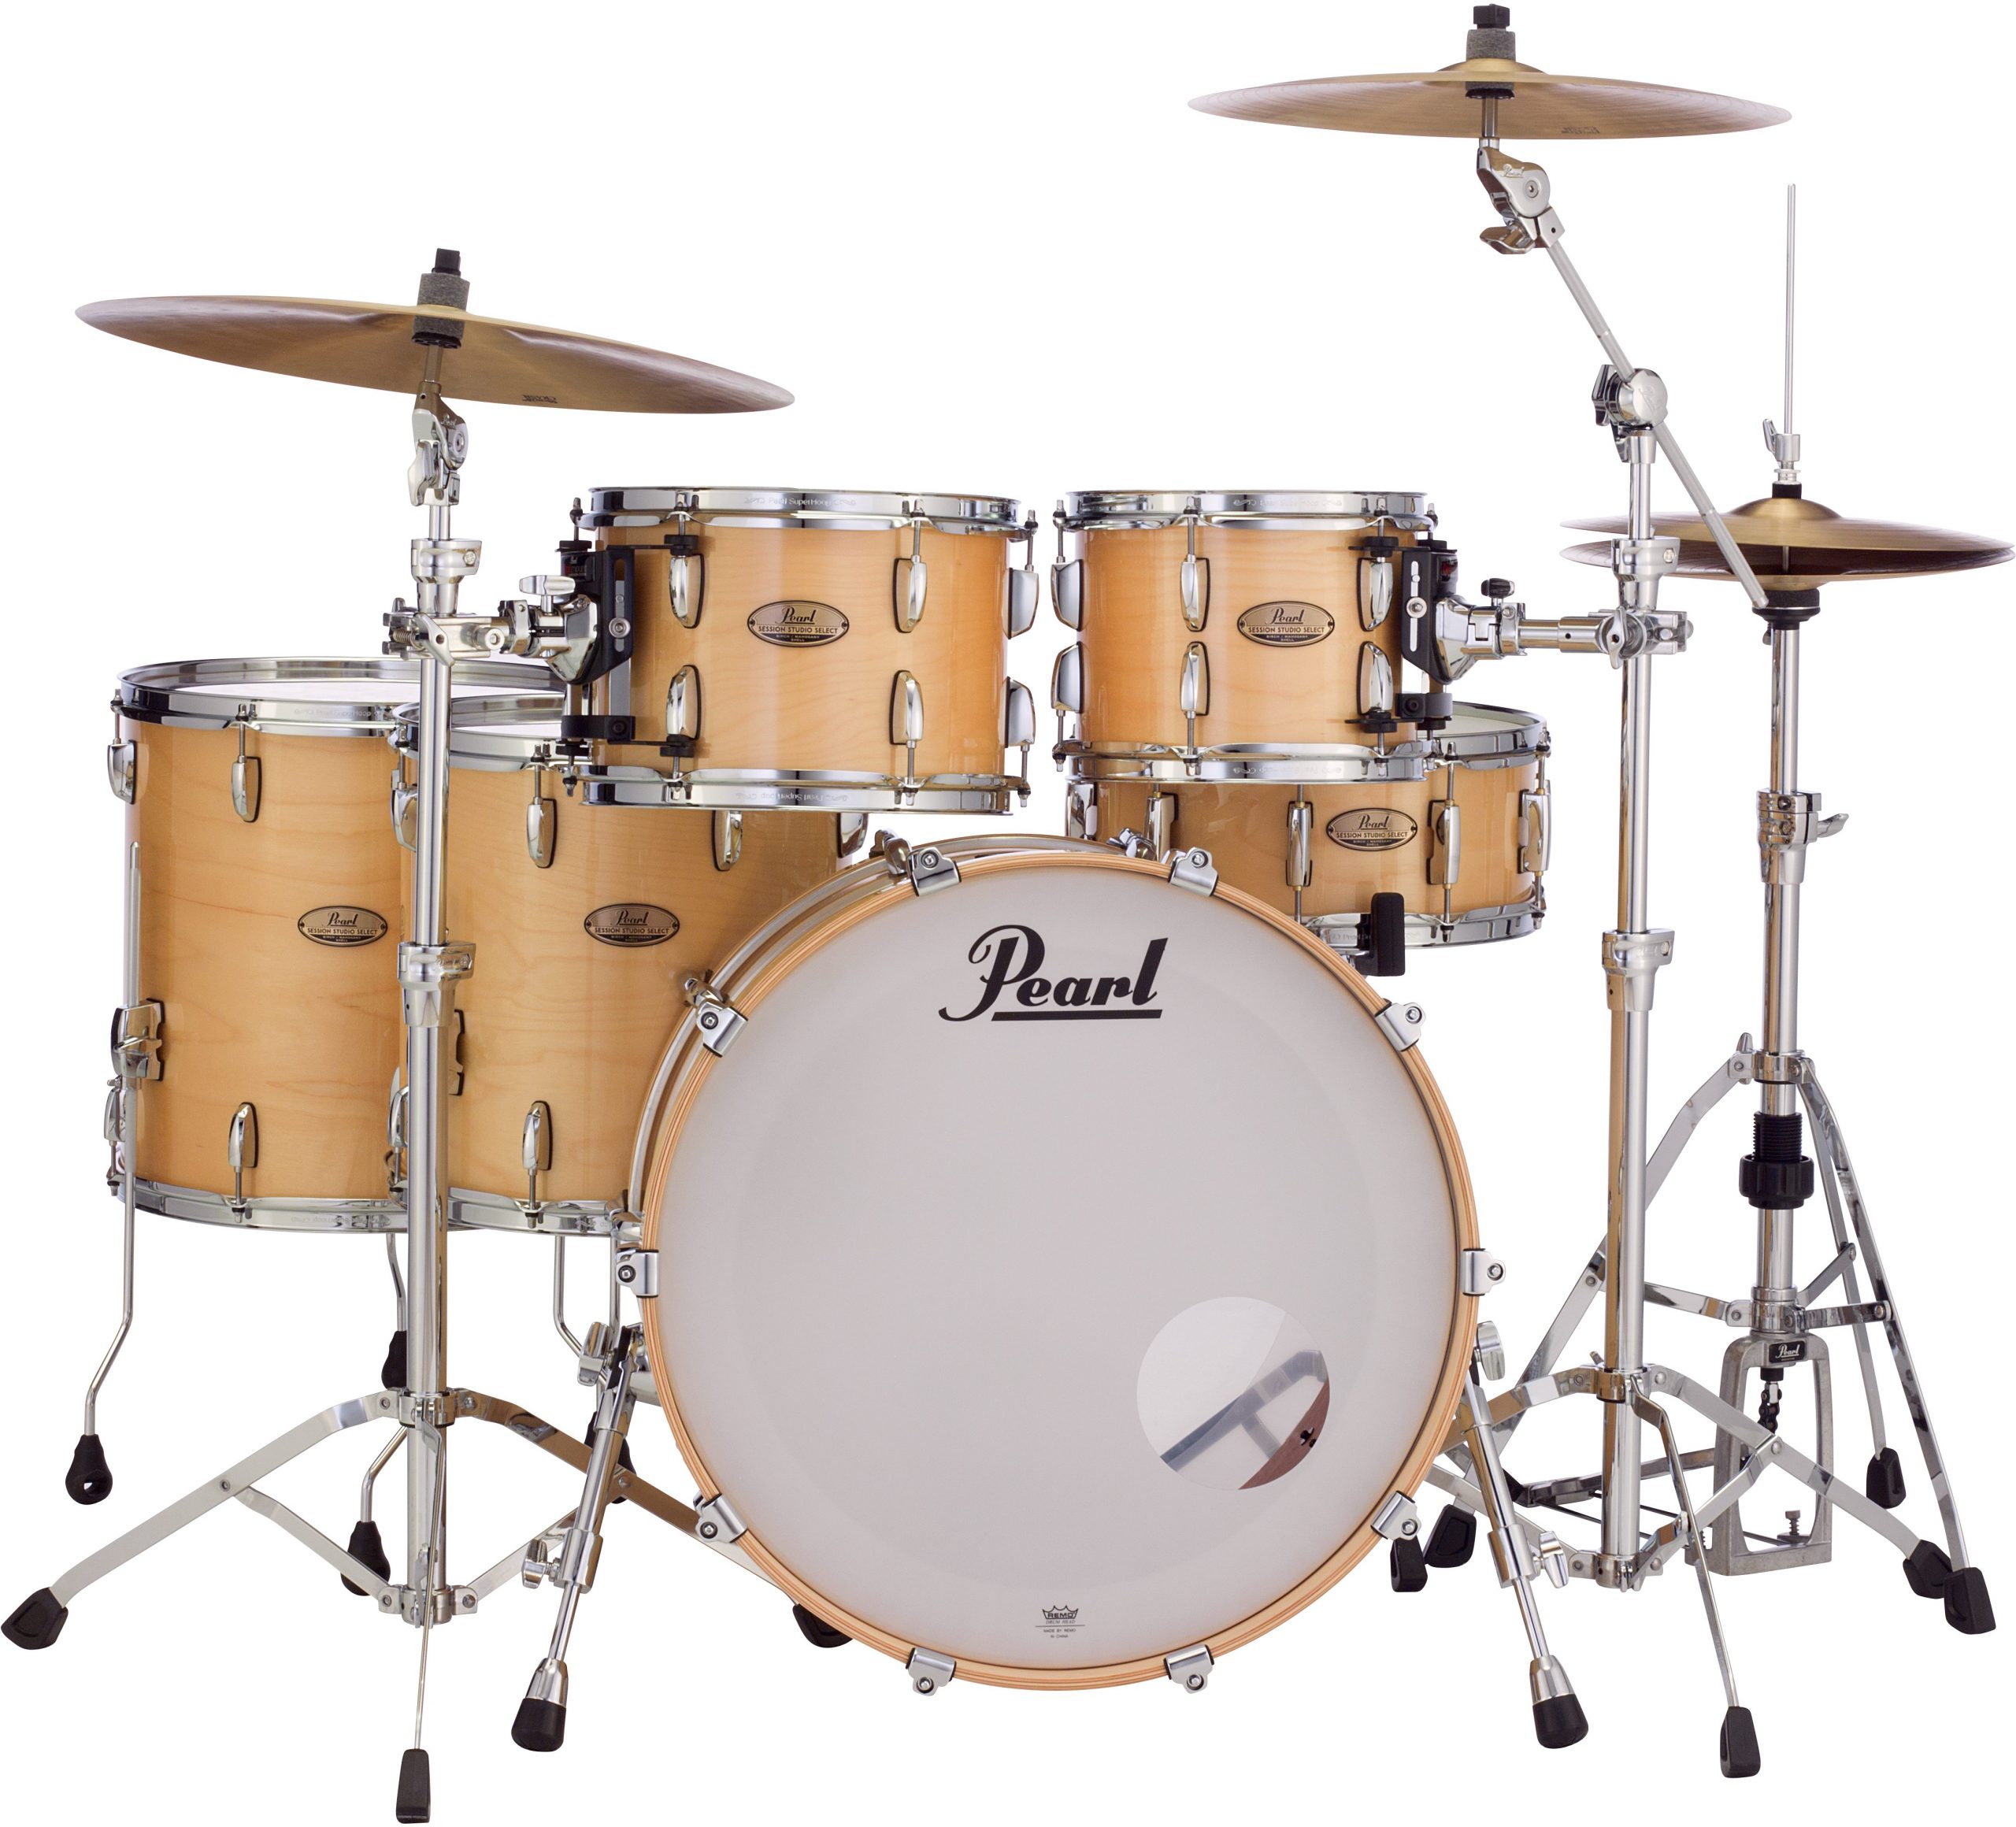 Acoustic Drums Buying Guide